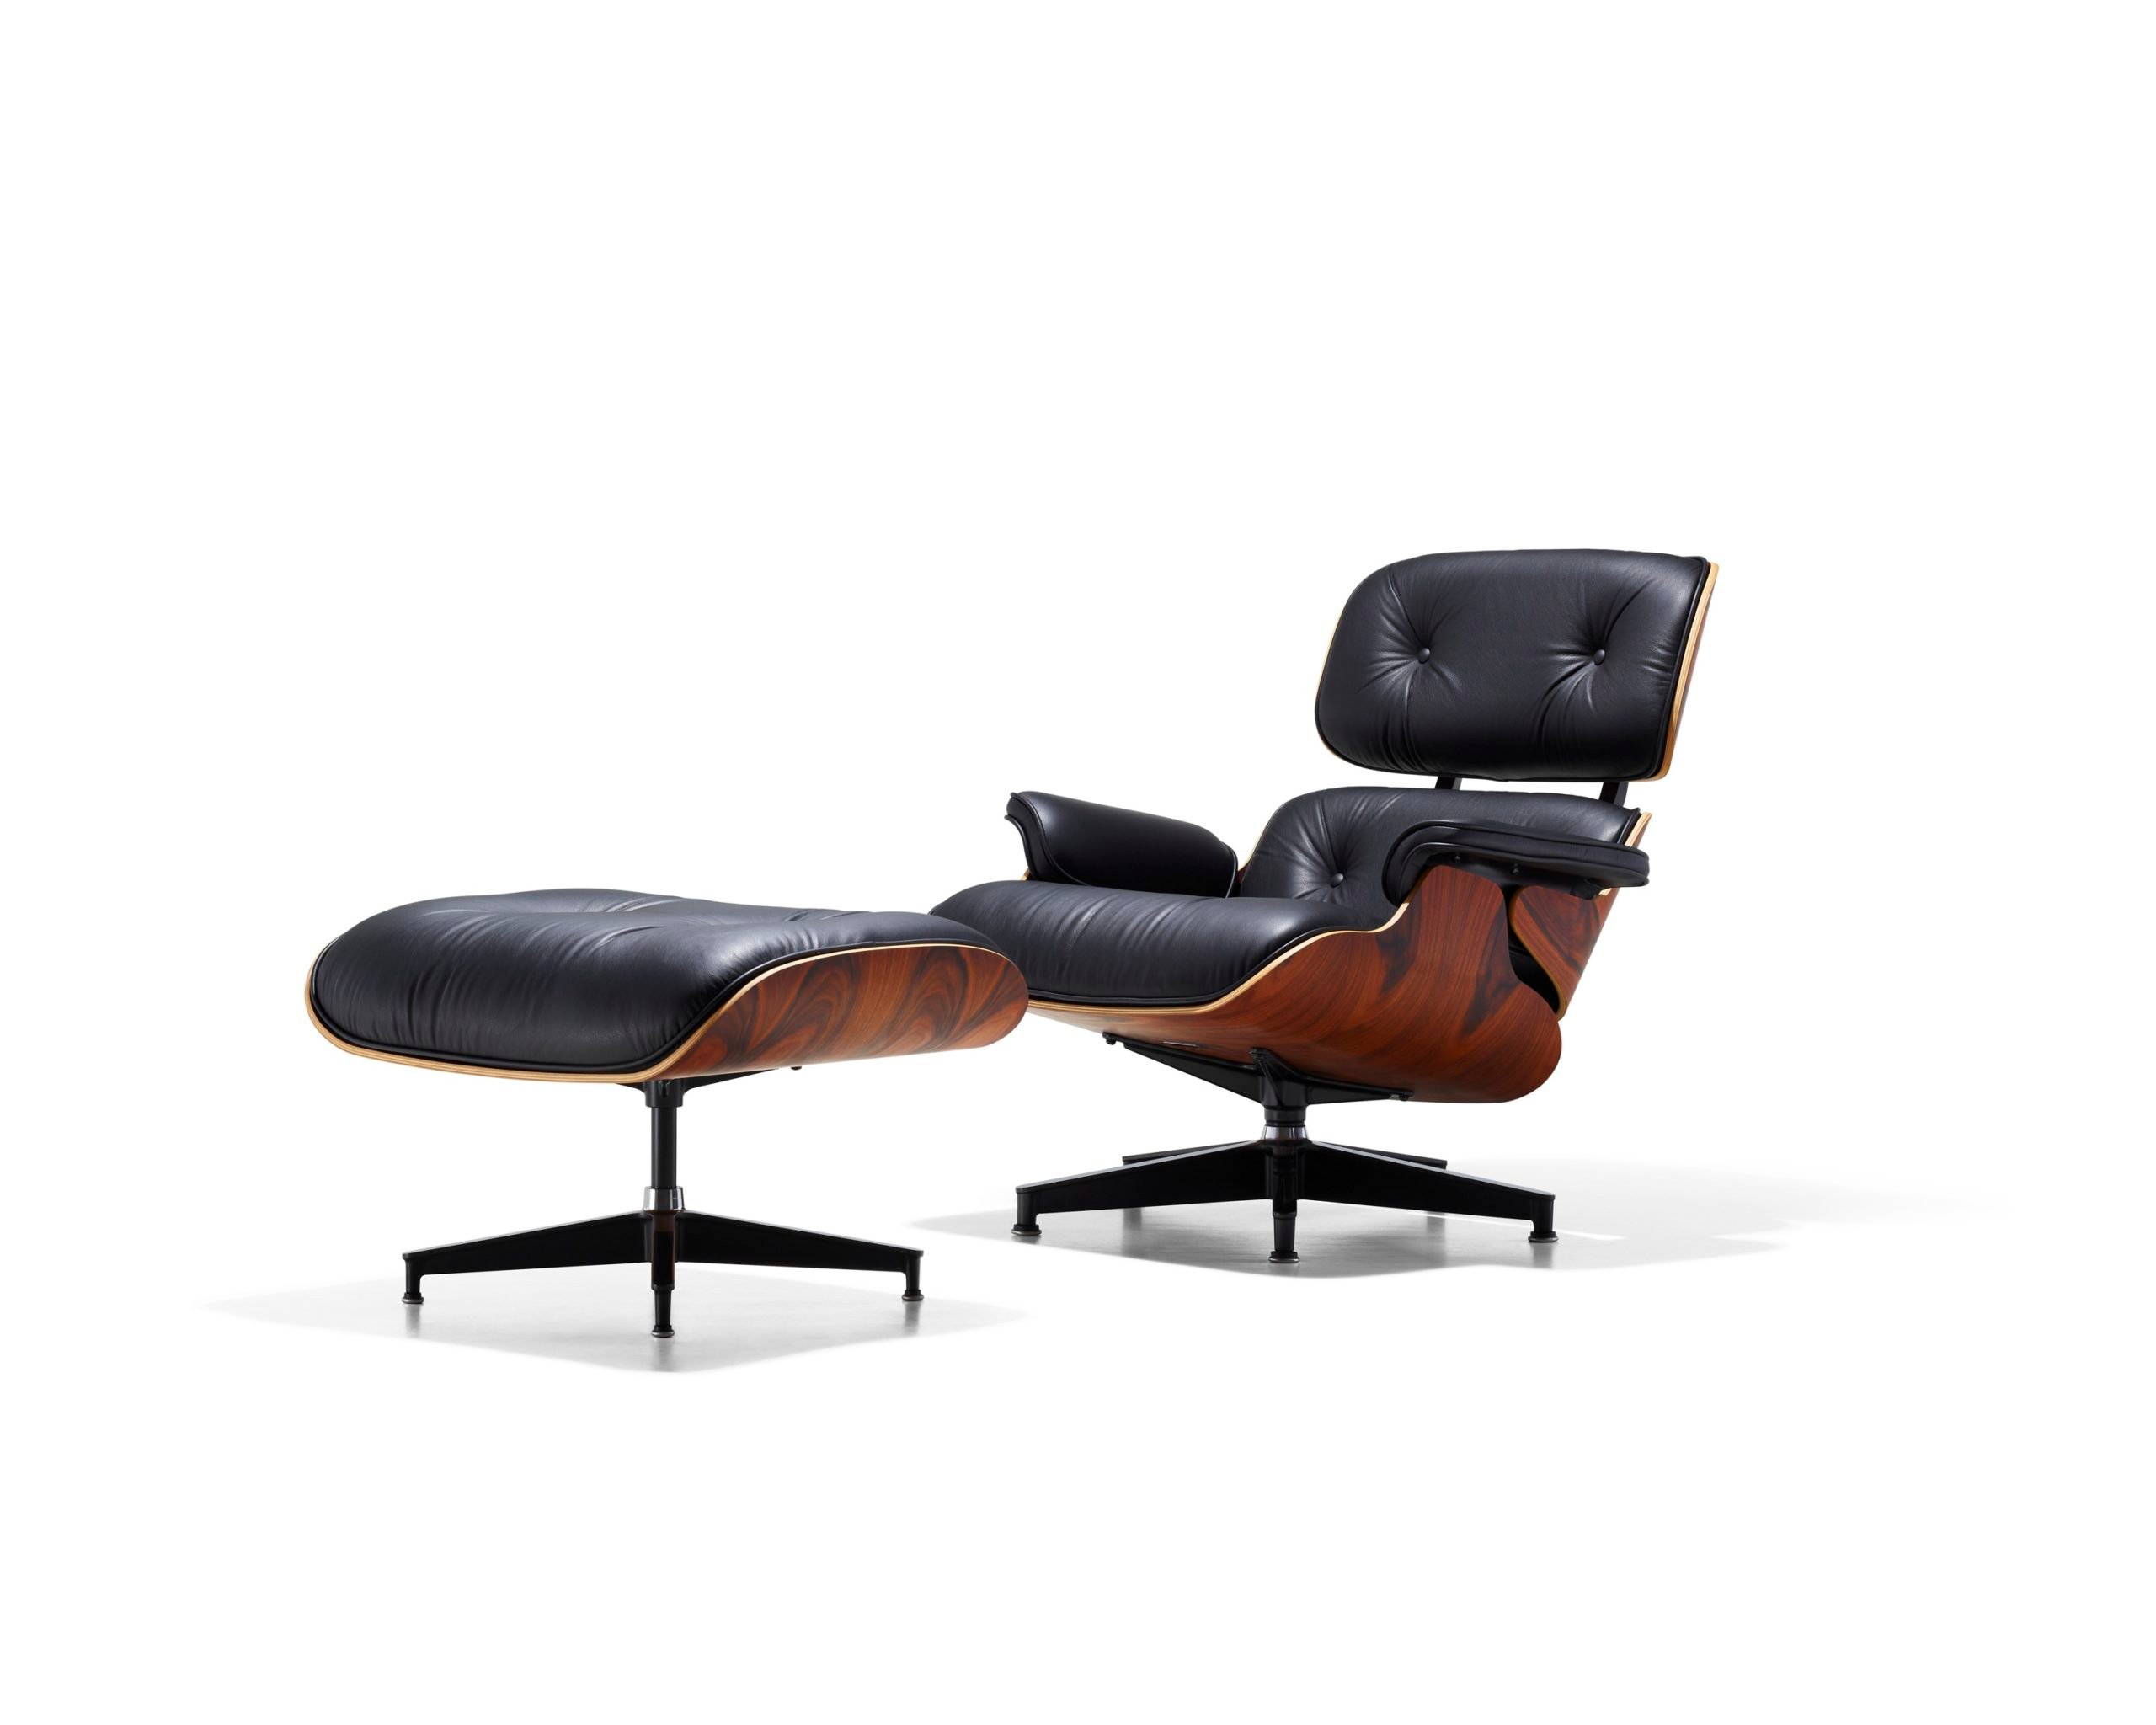 Voorzitter Baffle telex Eames® Lounge Chair and Ottoman - Eames Office